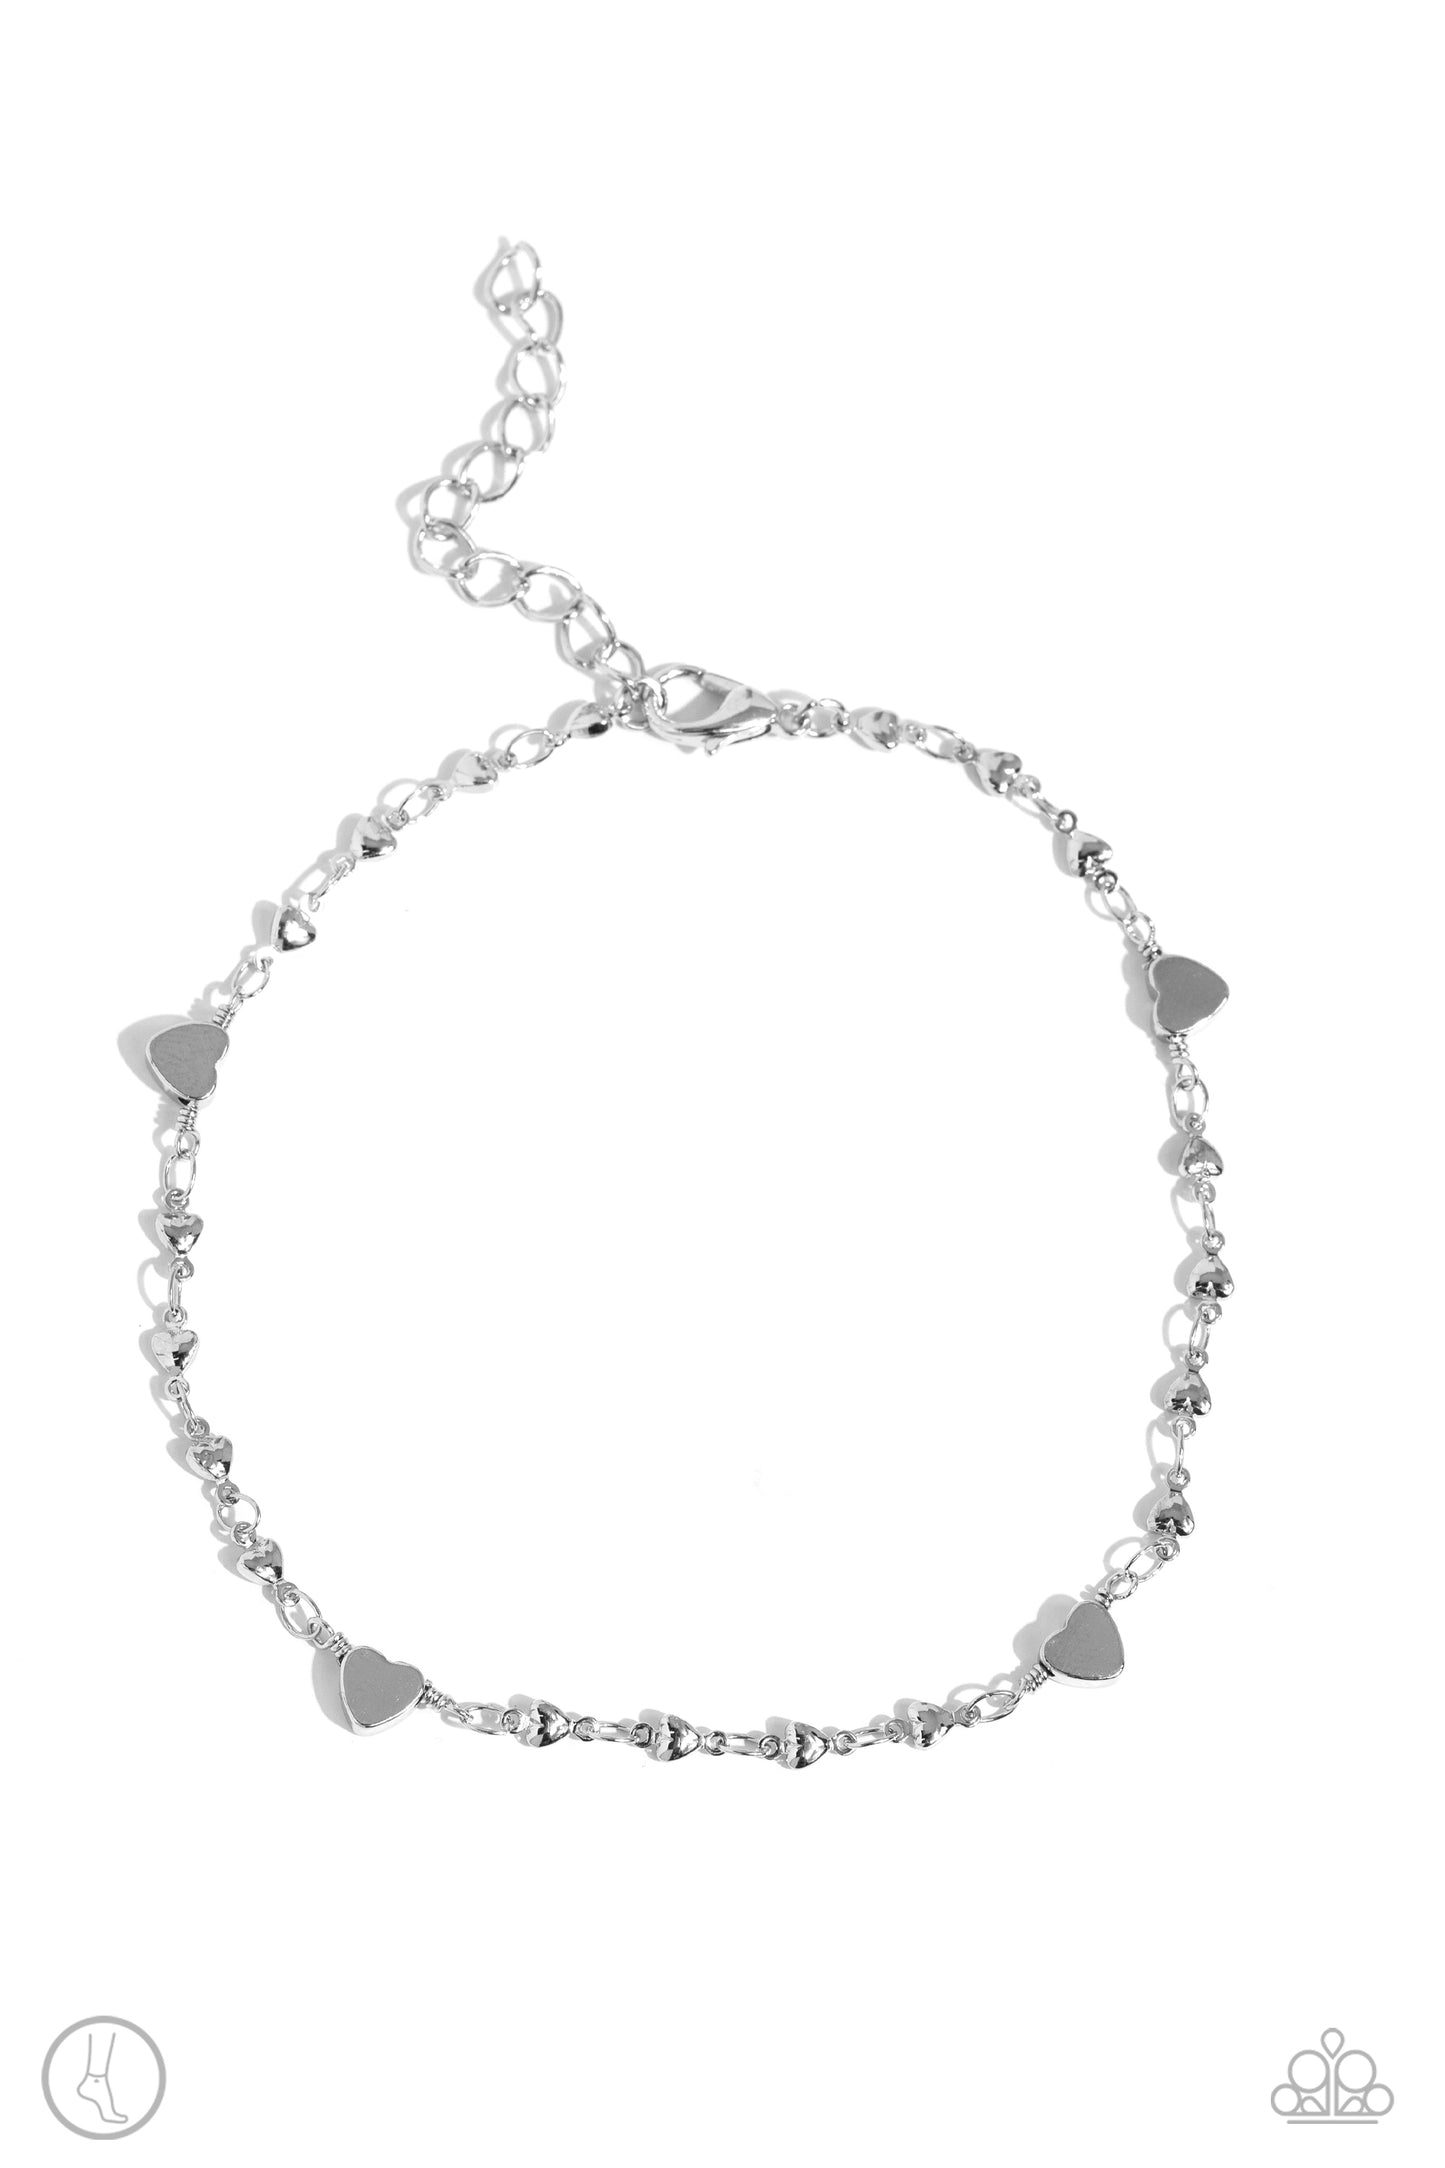 Highlighting My Heart - Silver Hearts Paparazzi Anklet